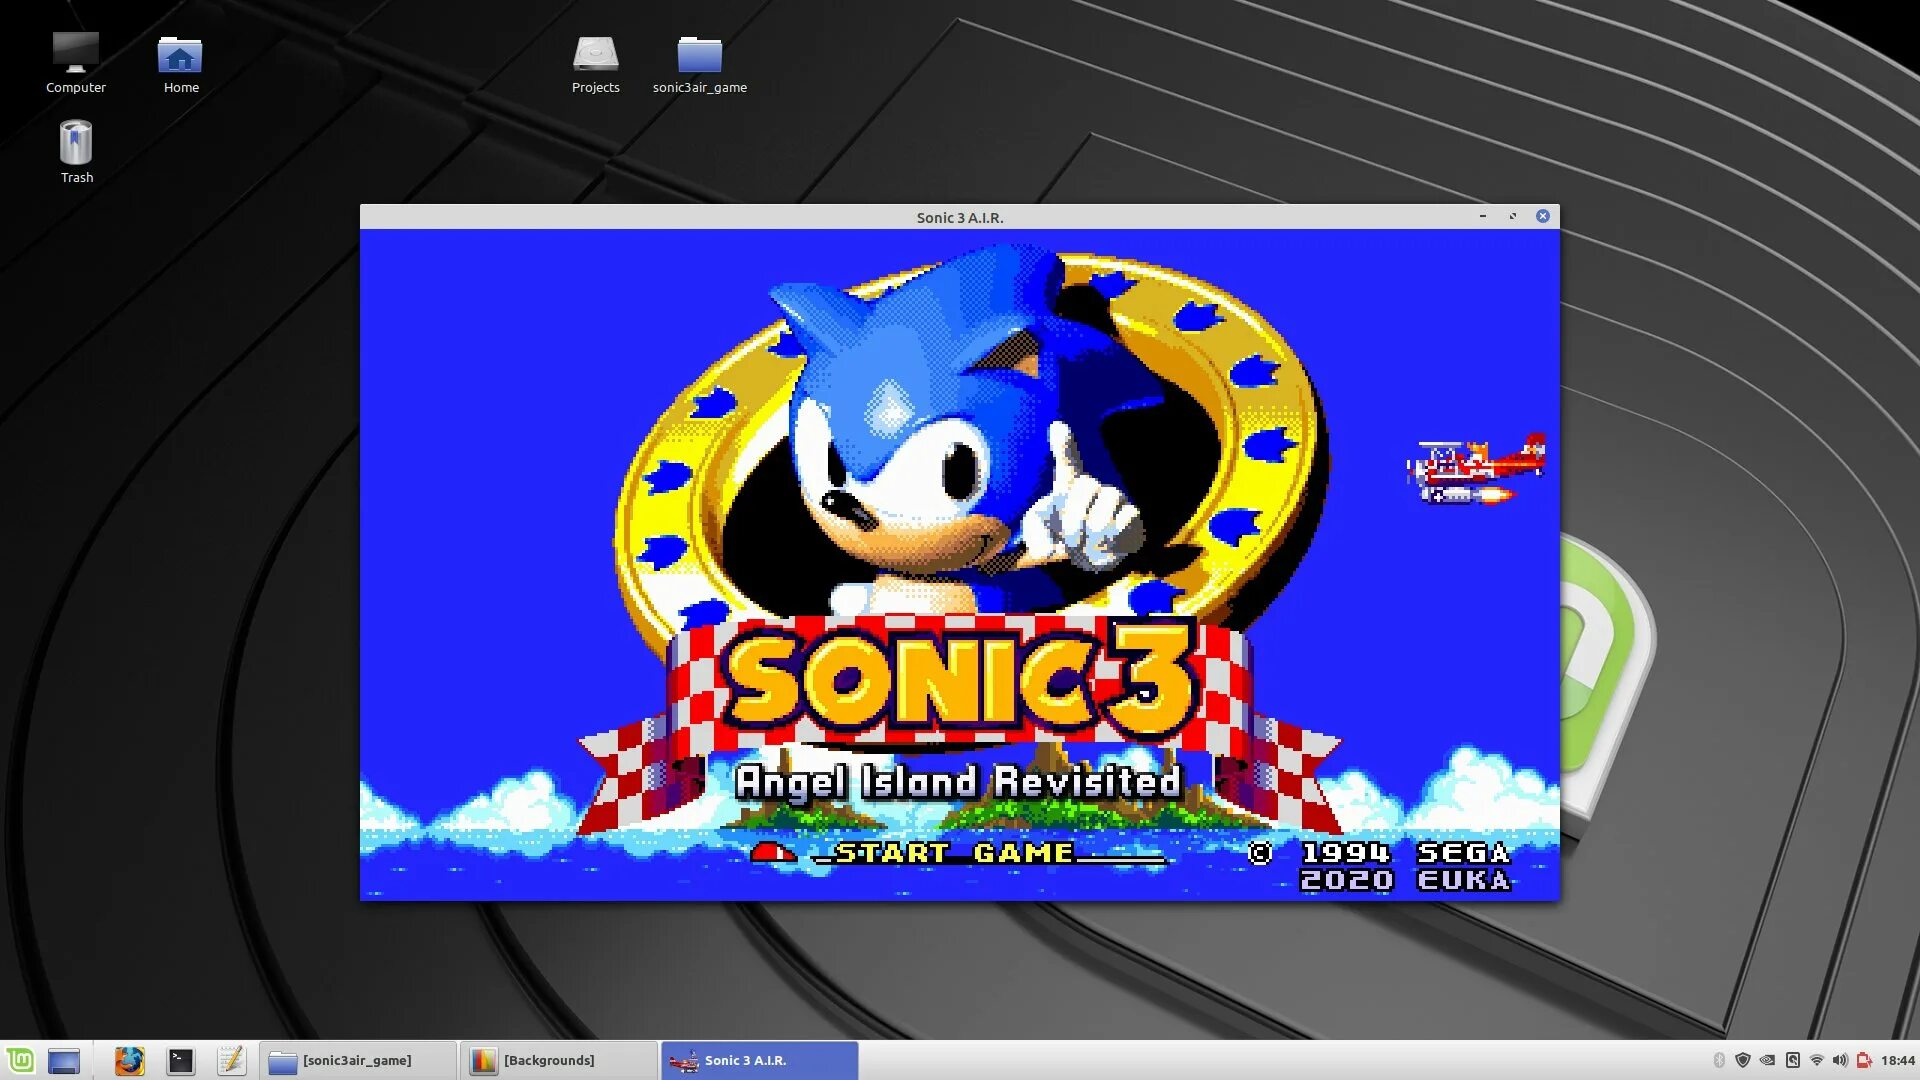 Sonic 3 АИР. Sonic 3 Air ROM. Соник 3 a.i.r. Sonic 3 complete. Sonic 3 air knuckles